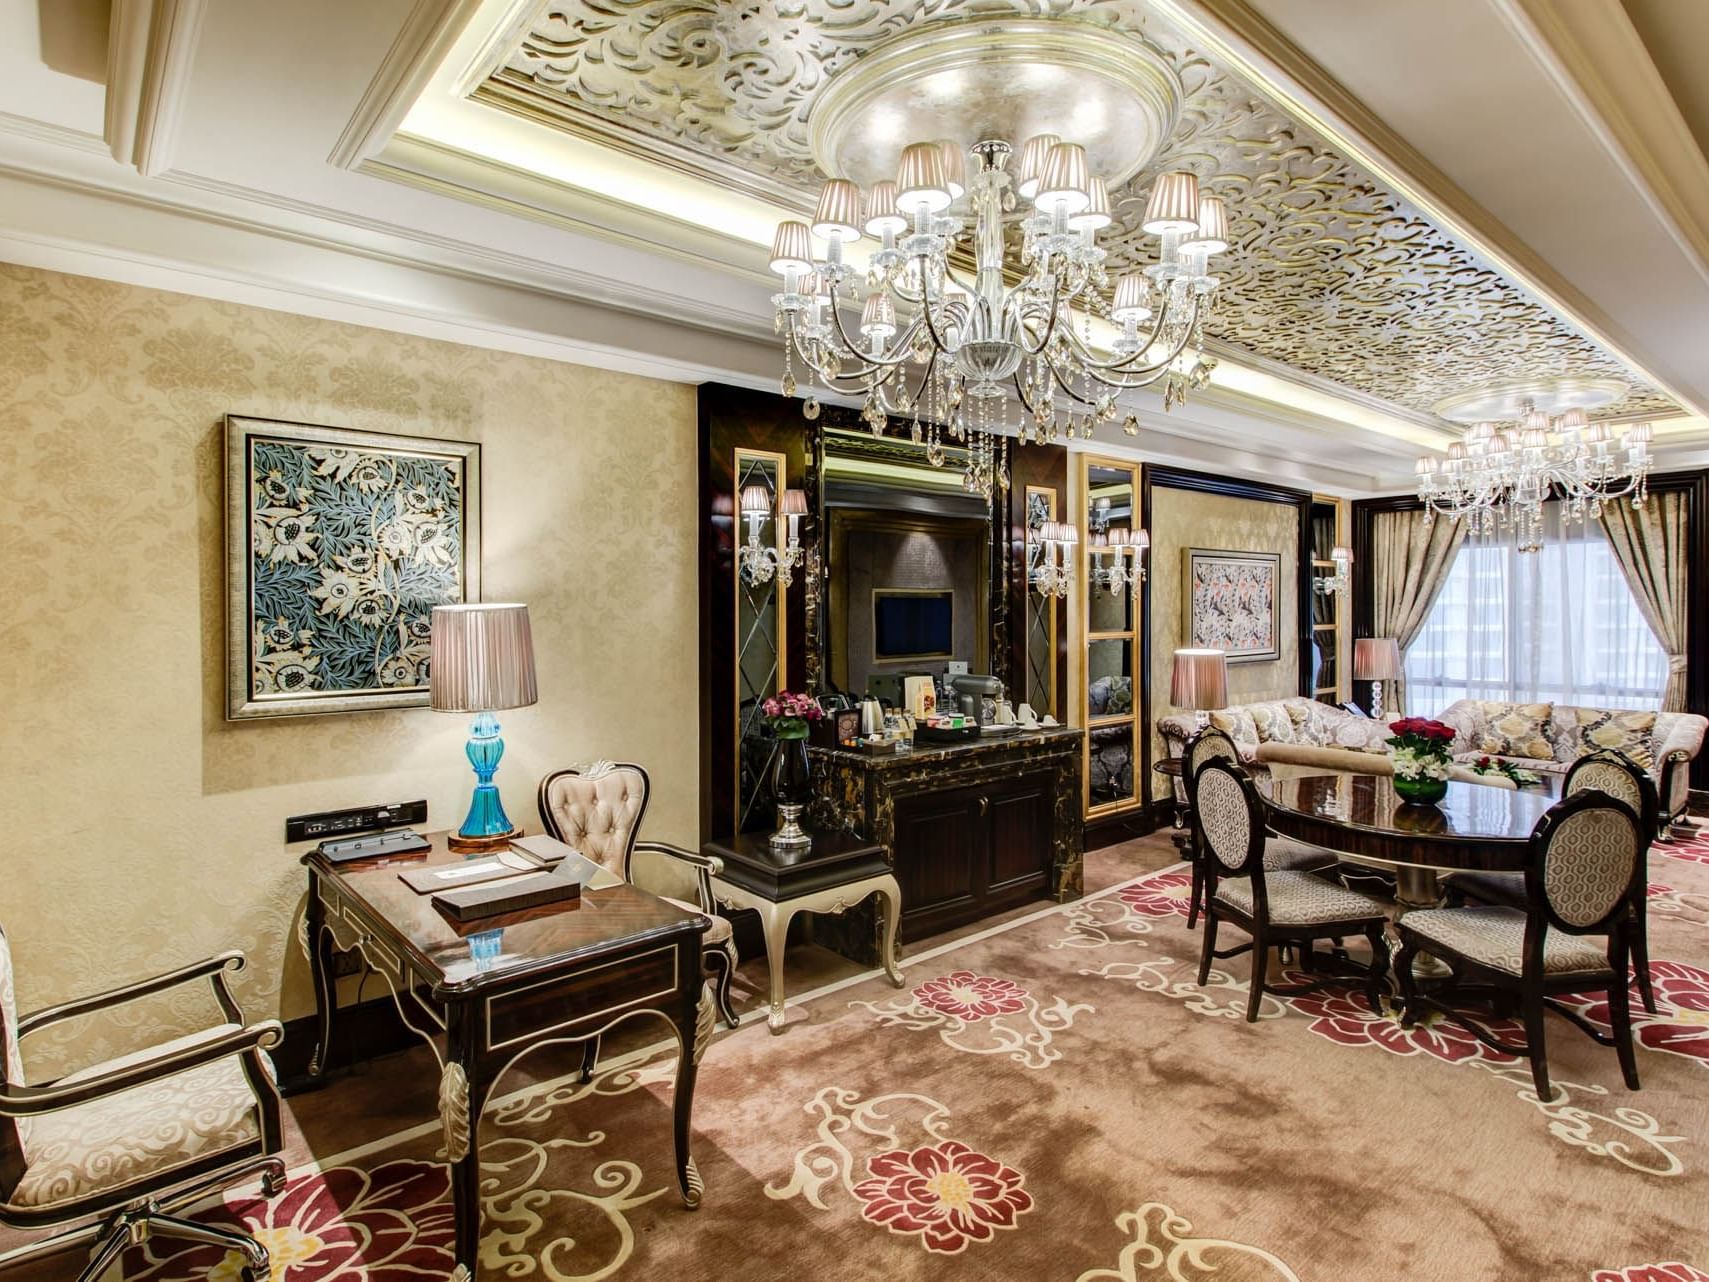 Interior of Presidential Suite at Narcissus Hotel & Spa Riyadh